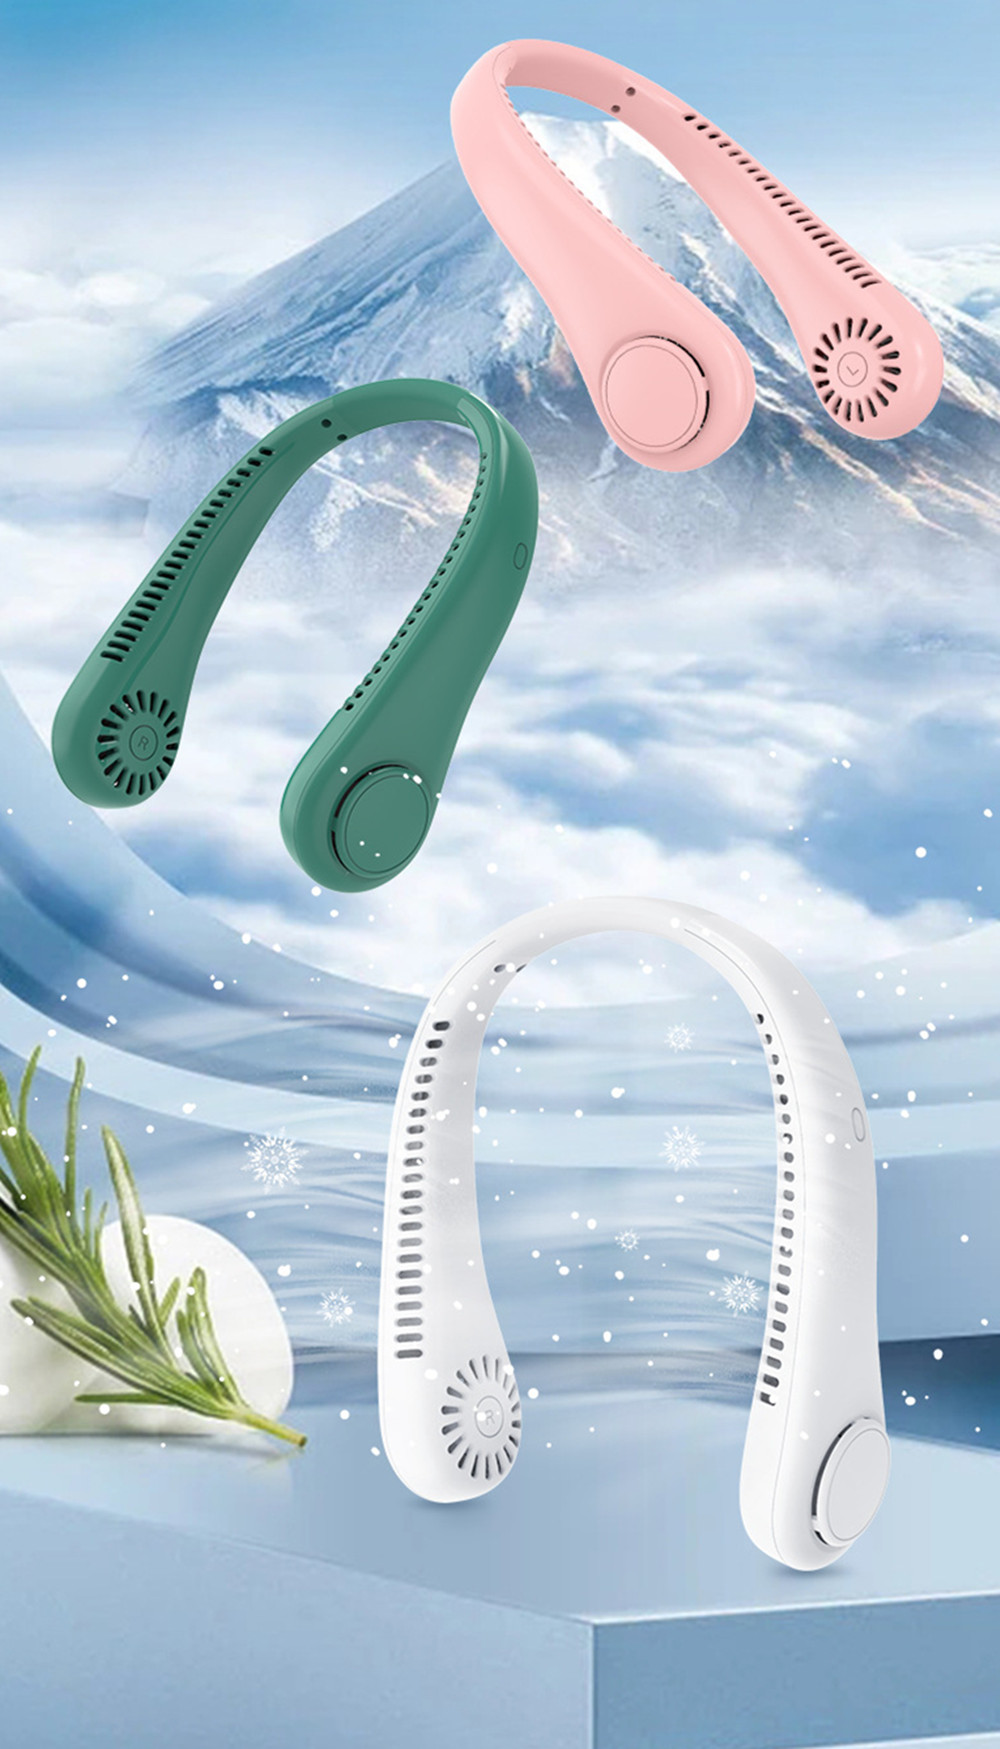 Rechargeable Bladeless Neckband Fans Air Cooler Summer Air Cooling Hanging Neck Fan Leafless Twistable Usb Ventilator